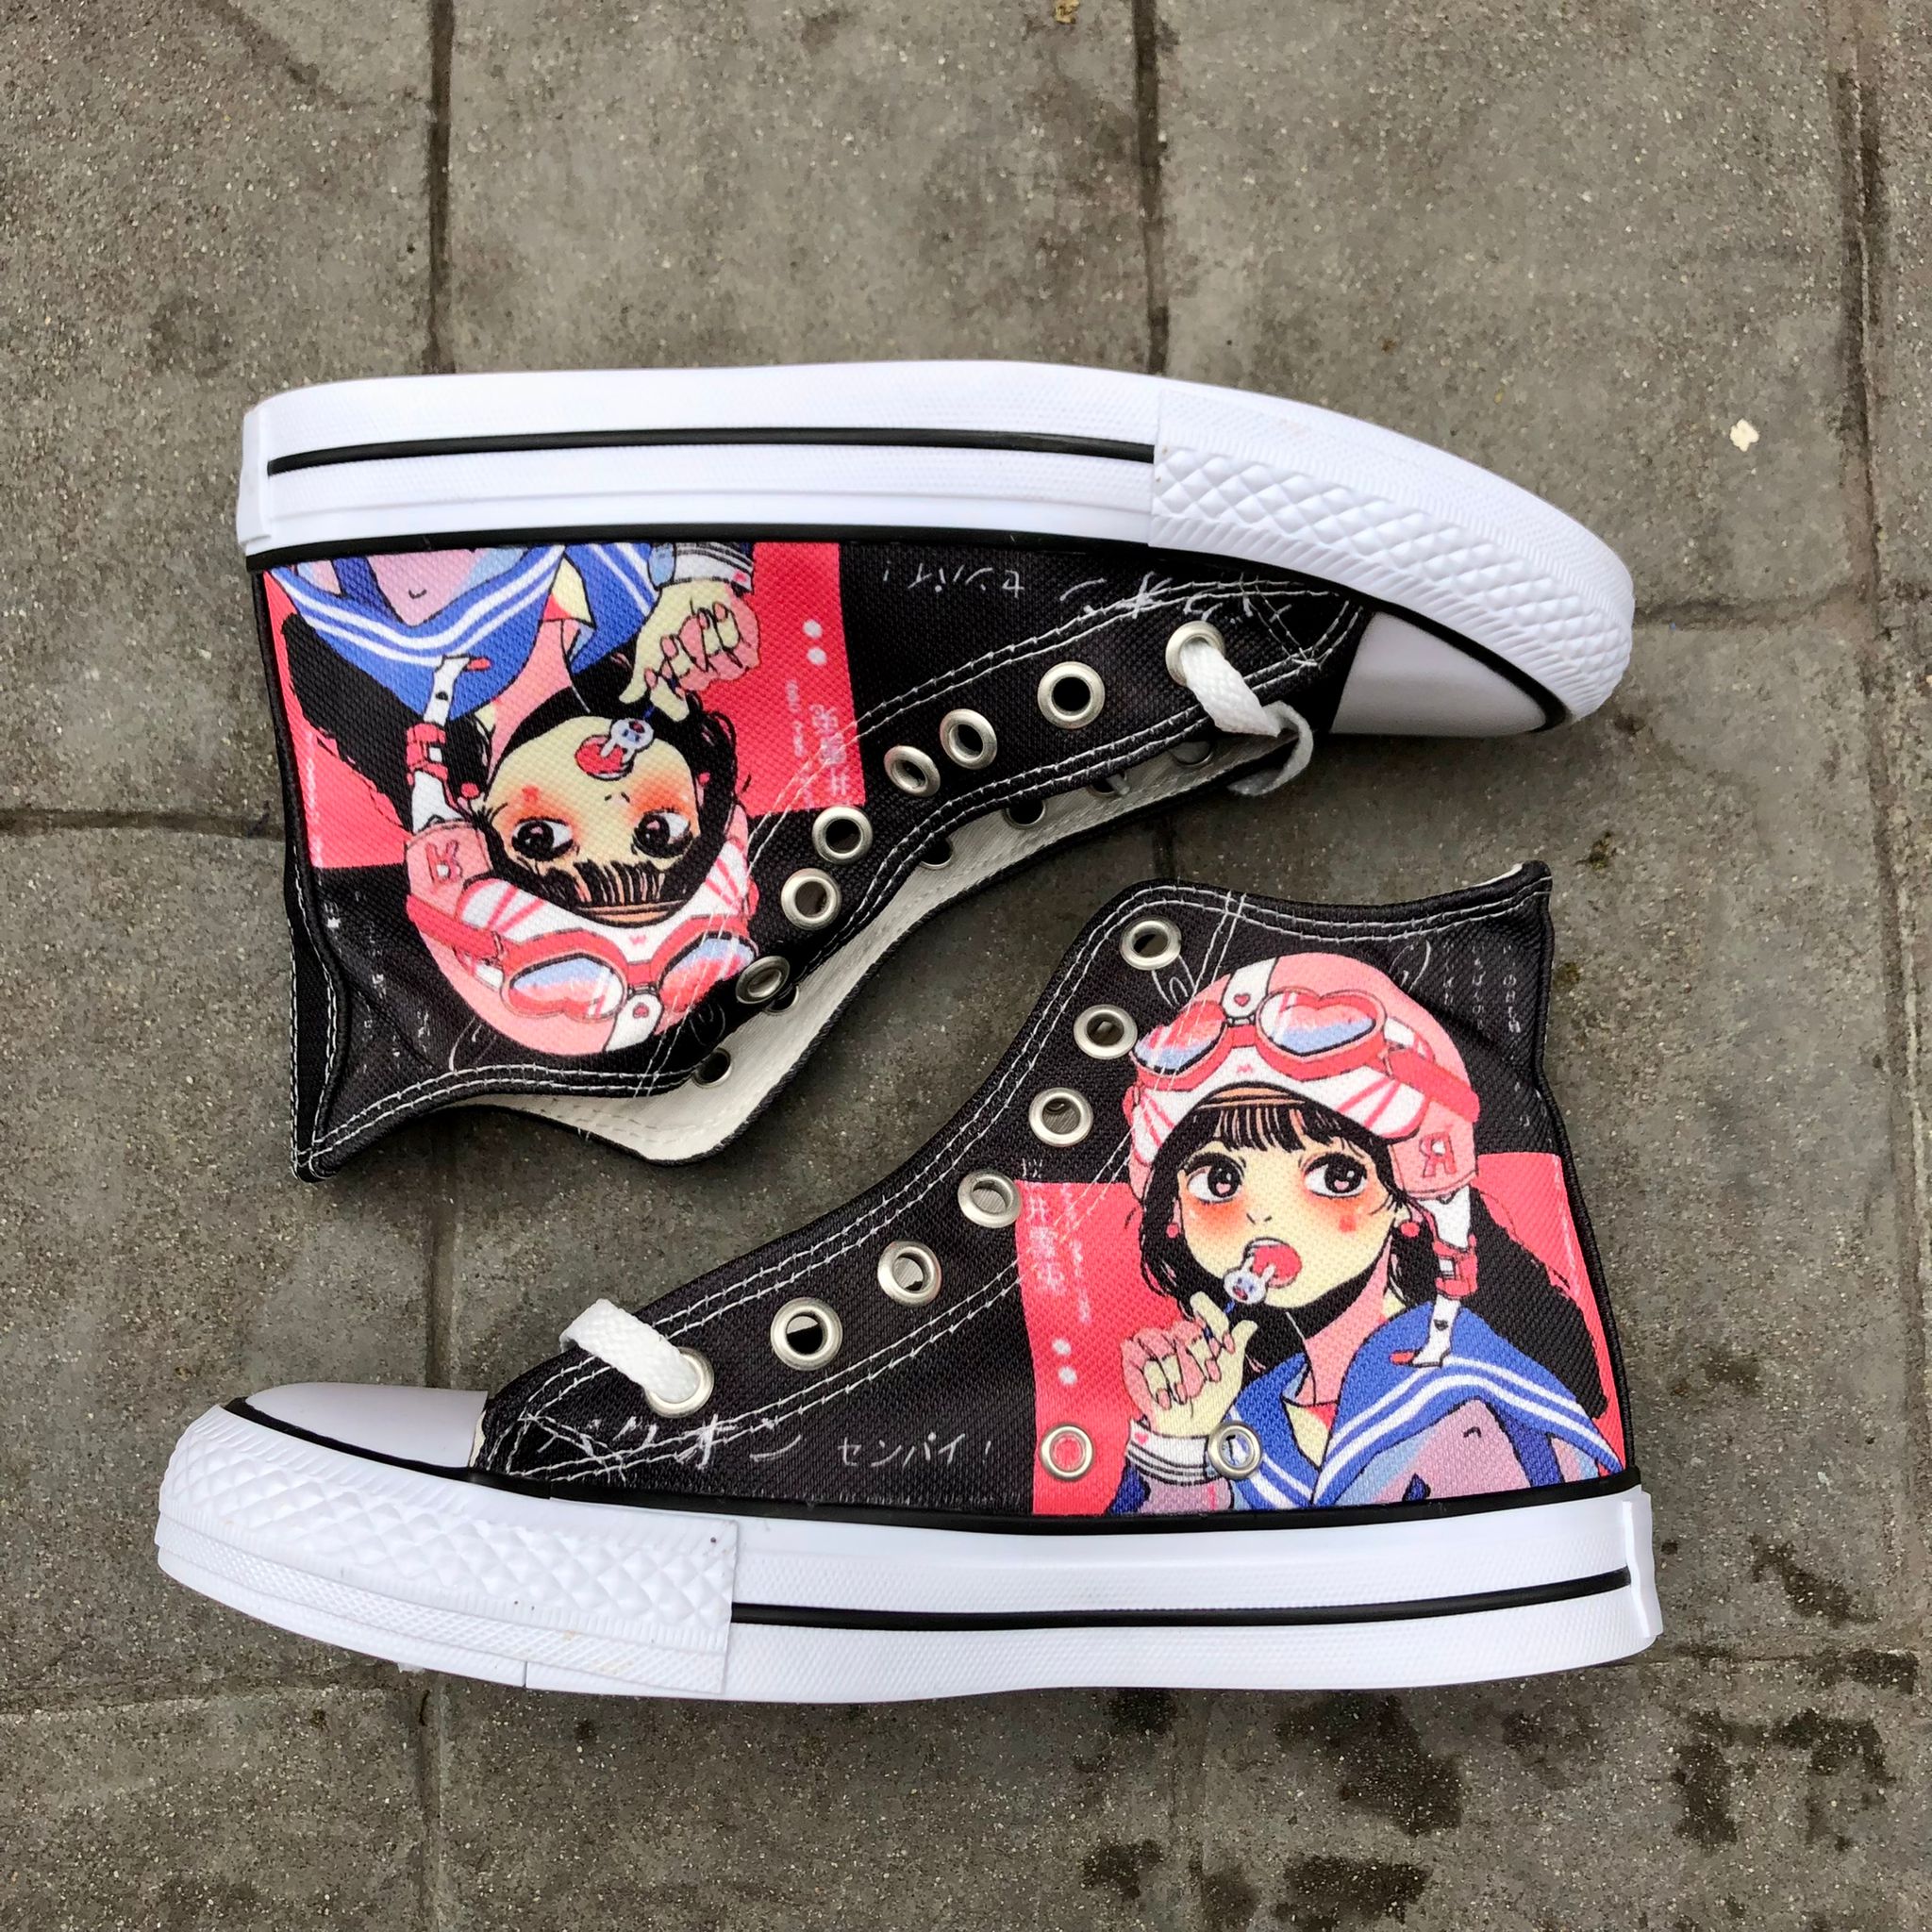 Anime Converse All Star MekakuCity Actors Hand Painted Shoes High Top Black  Canvas Shoes Gifts